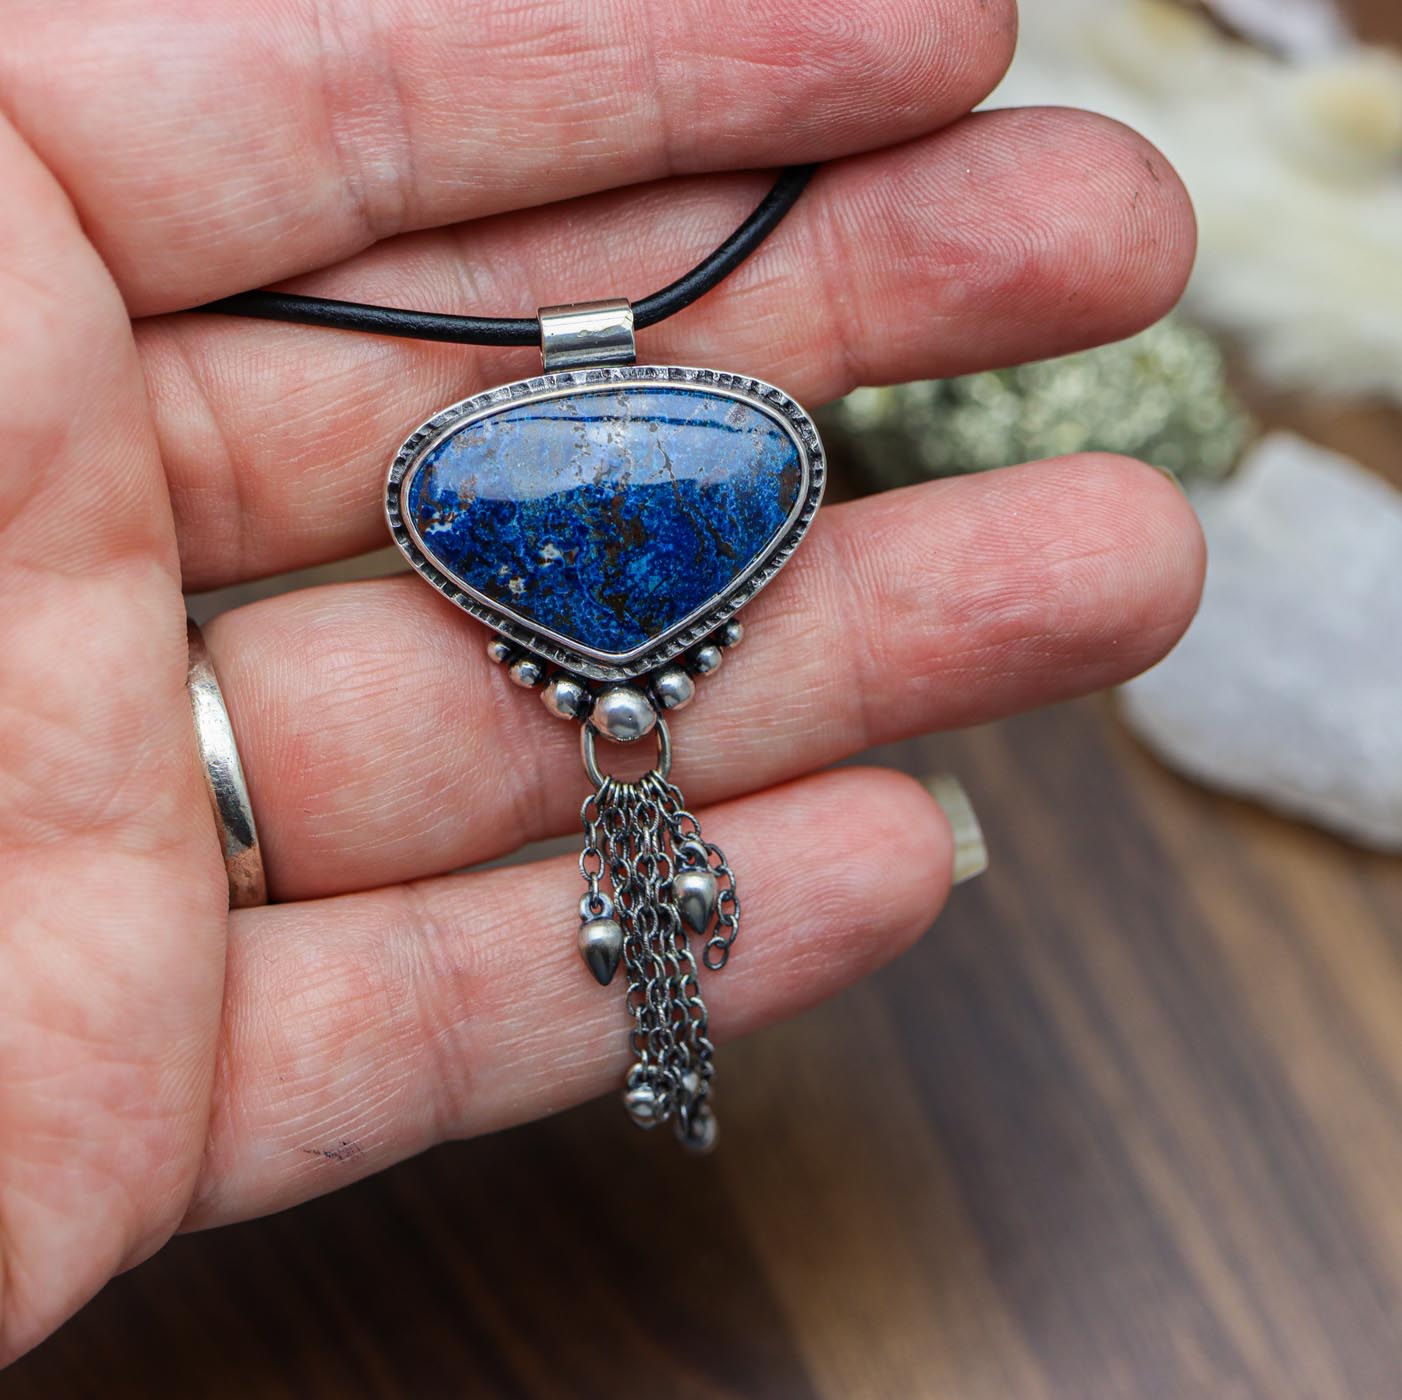 Vivid Blue Shattuckite Pendant Sterling Silver One Of a Kind Gemstone Necklace